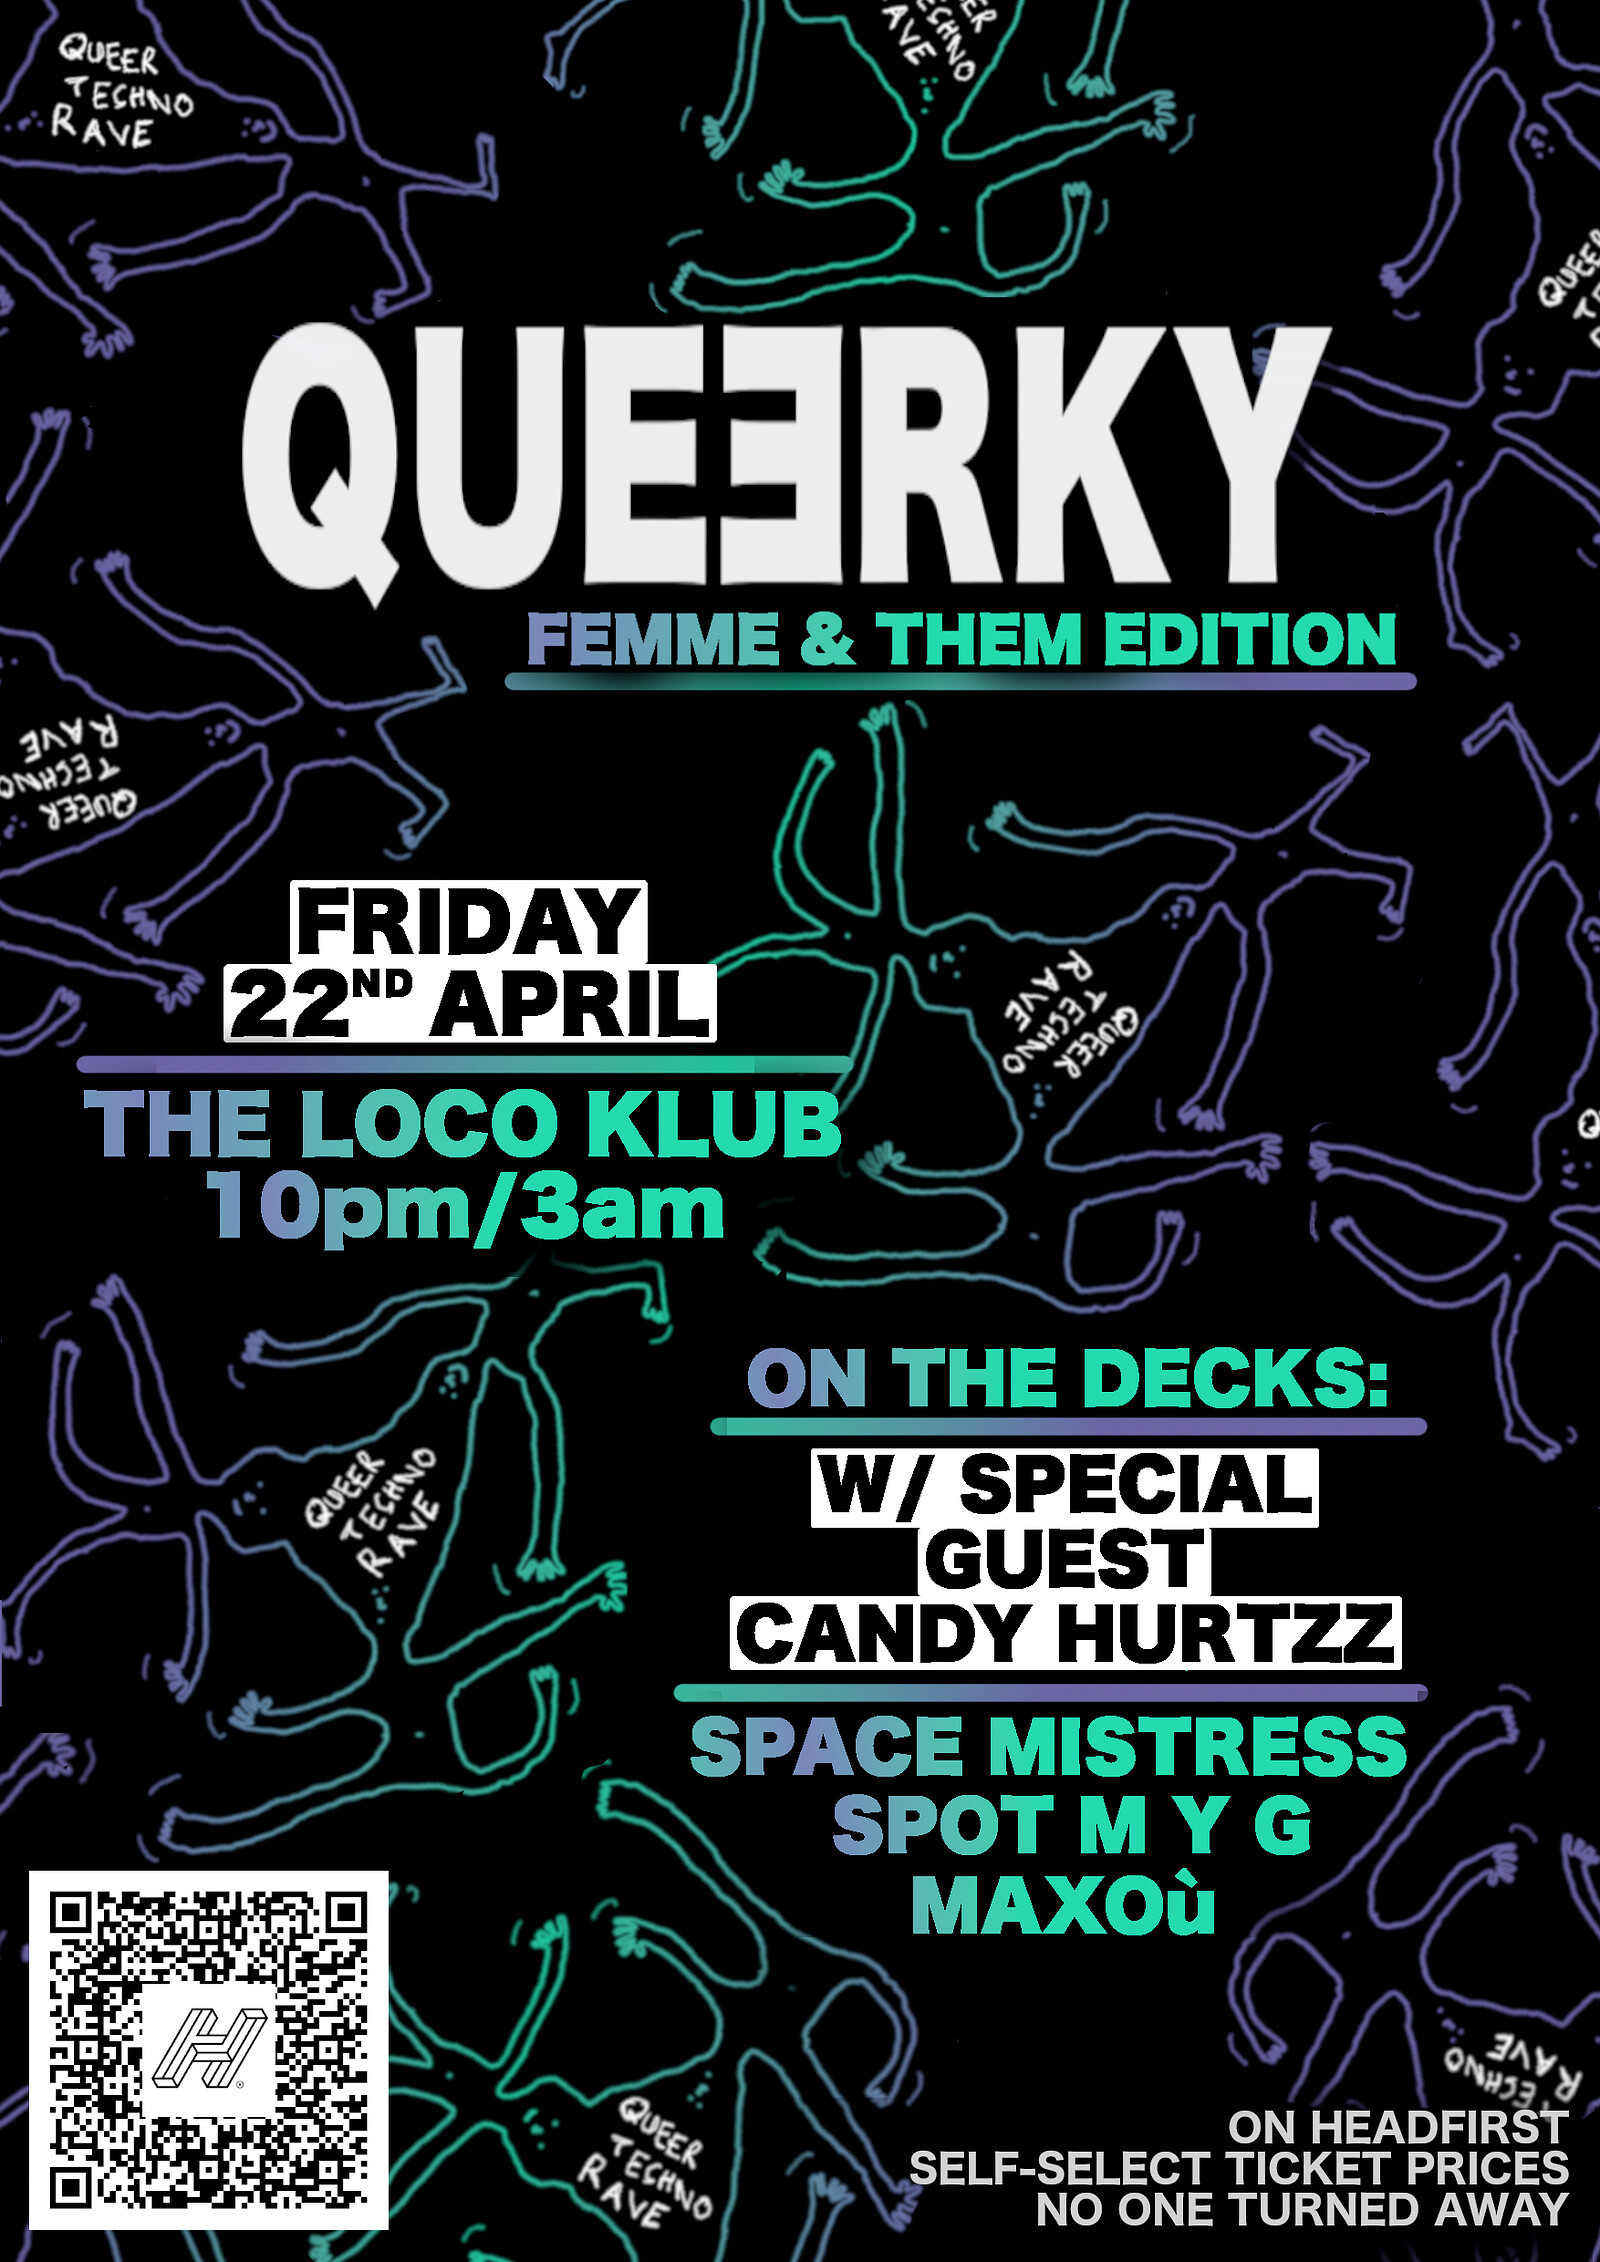 QUEERKY - Femme & Them Edition W// CANDY HURTZZ at The Loco Klub